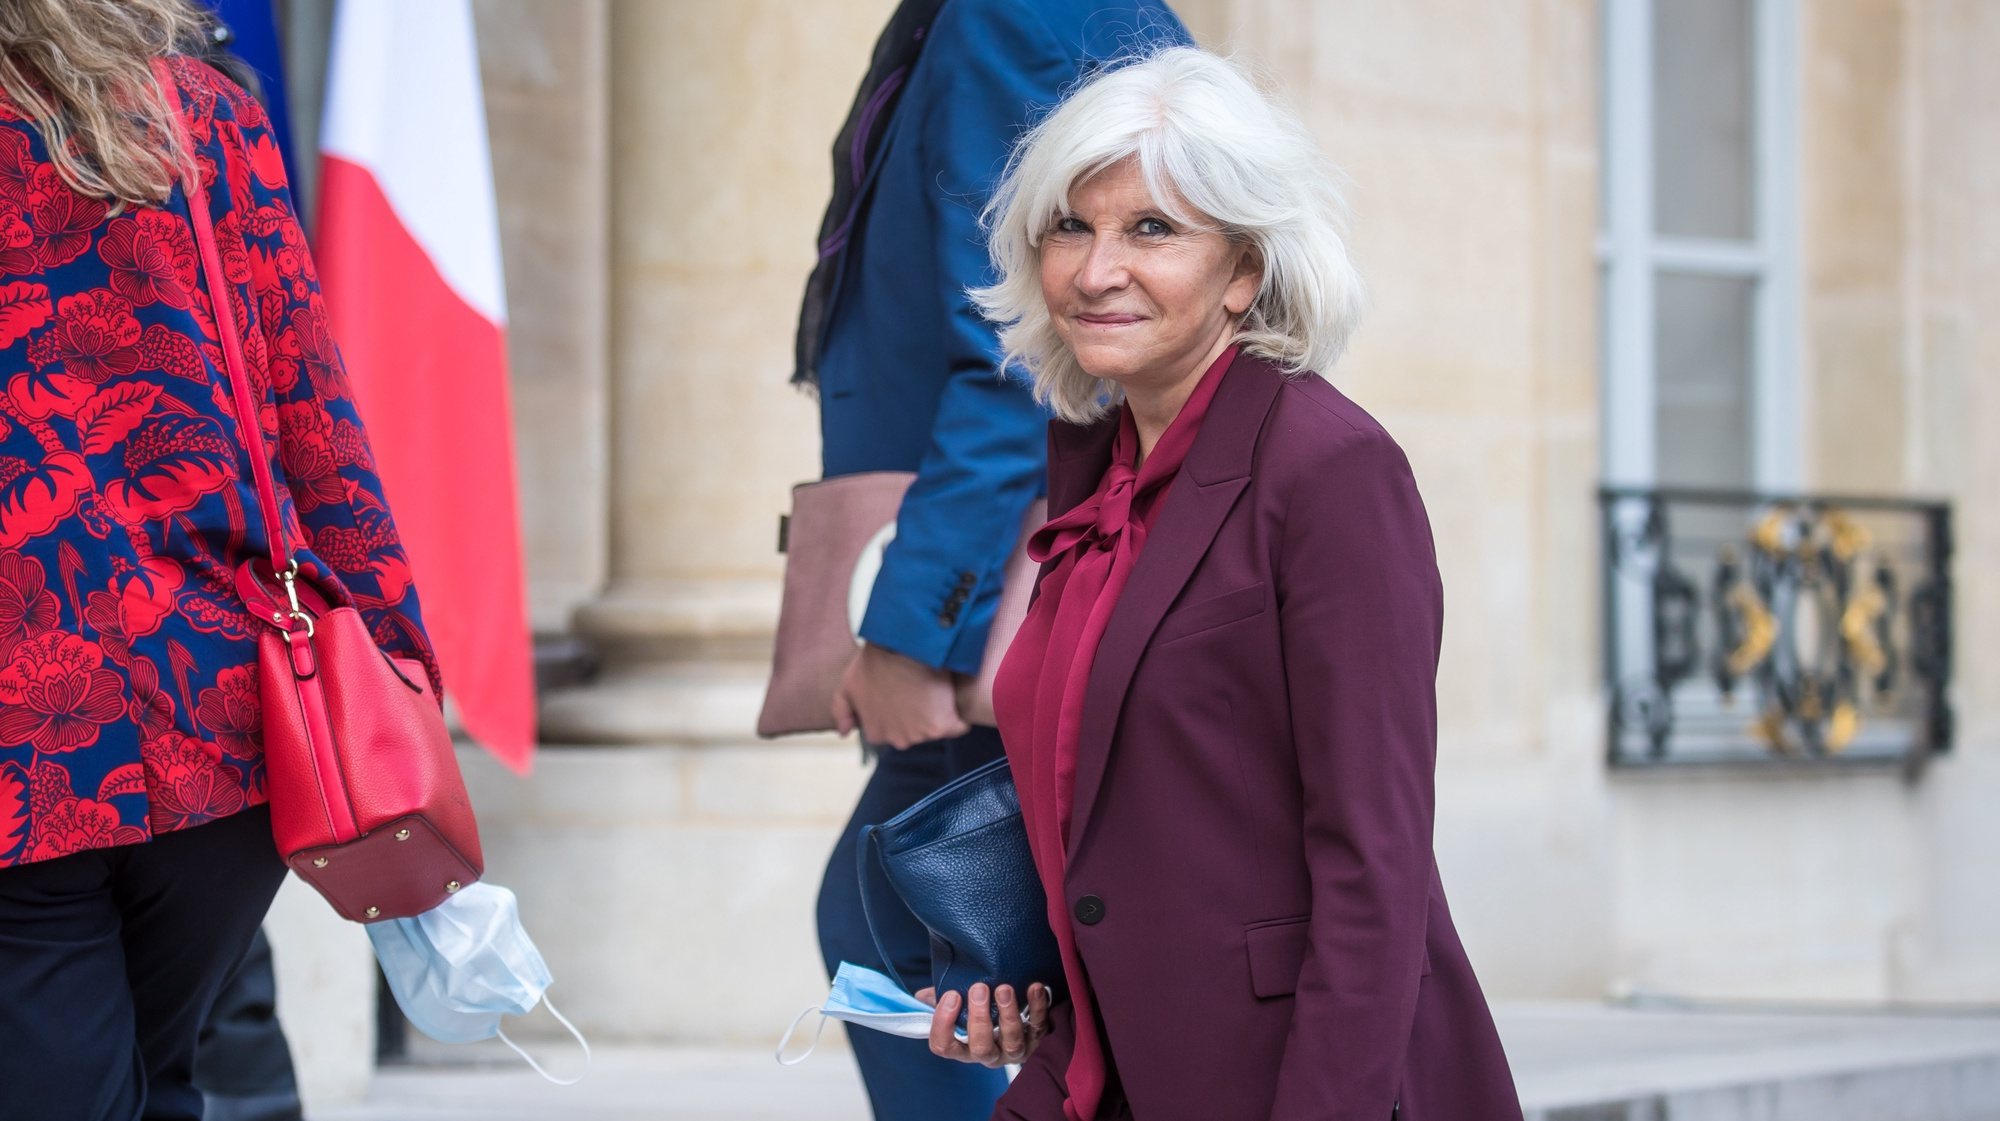 epa08515496 France’s Climate Change Ambassador Laurence Tubiana (C) arrives for a meeting with members of the Citizens&#039; Convention on Climate (CCC) to discuss environment-related proposals, at the Elysee Palace in Paris, France, 29 June 2020. The CCC is made up of 150 members selected using randomly-generated phone numbers who have to make proposals for reforms related to the environment and the climate.  EPA/CHRISTOPHE PETIT TESSON